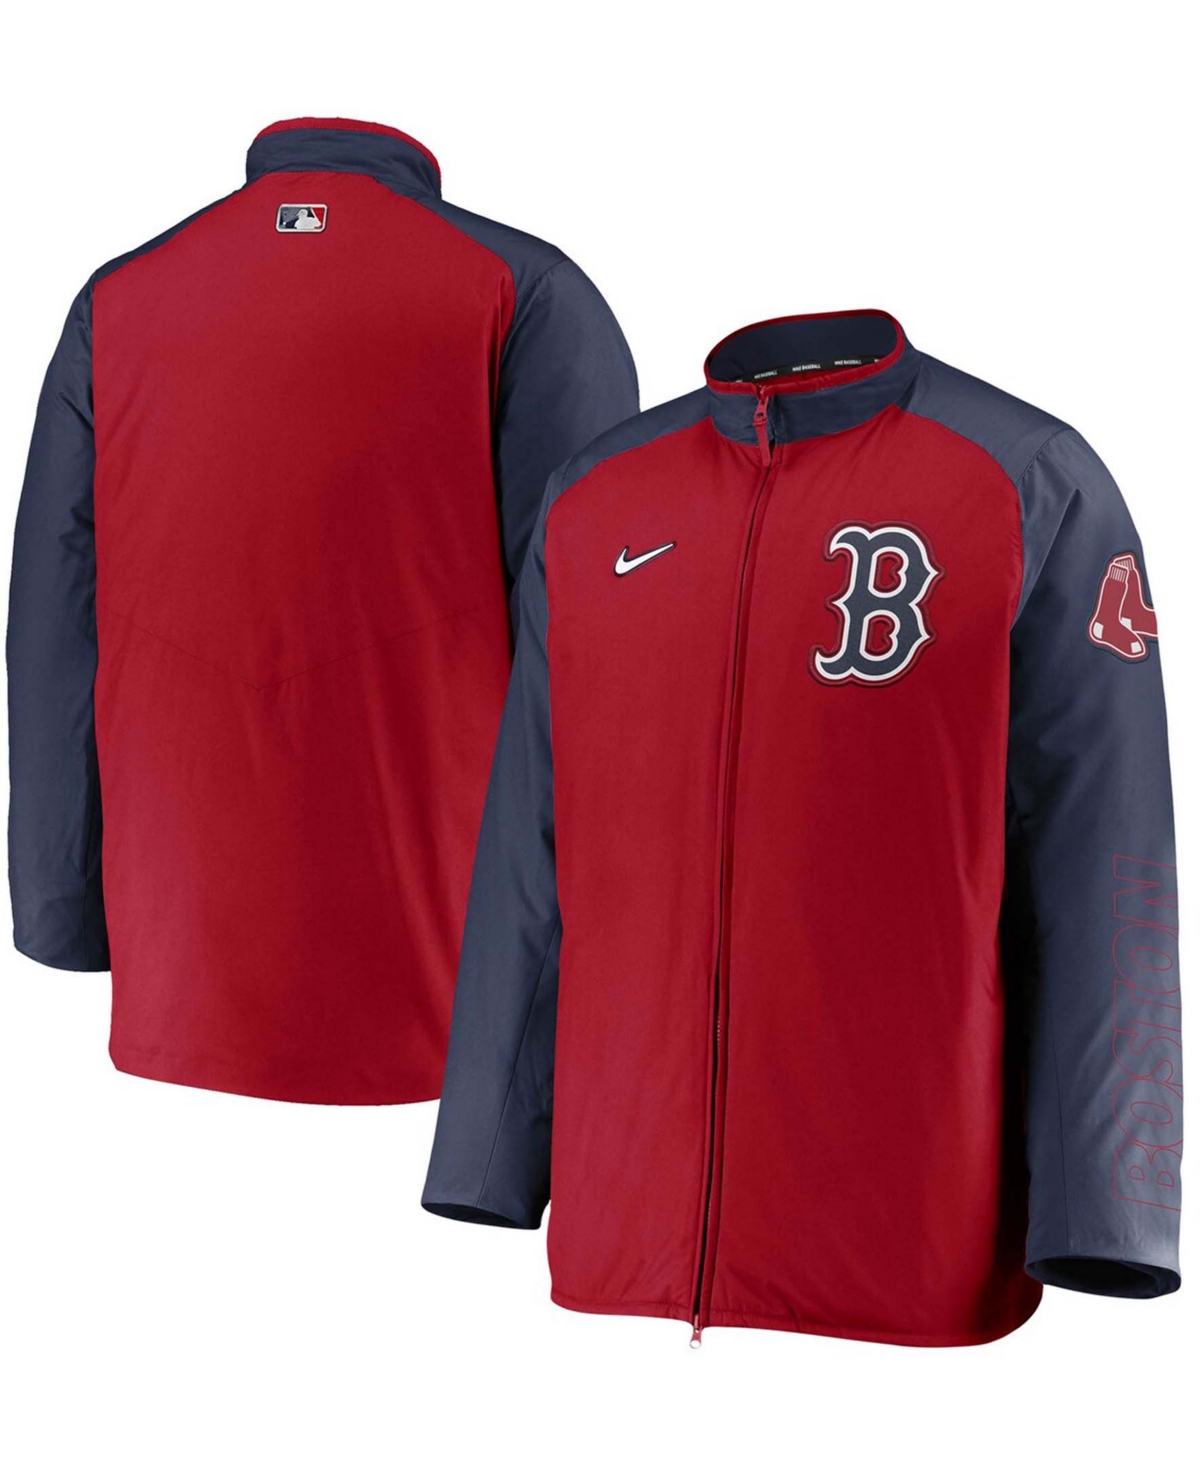 Men's Red, Navy Boston Red Sox Authentic Collection Dugout Full-Zip Jacket